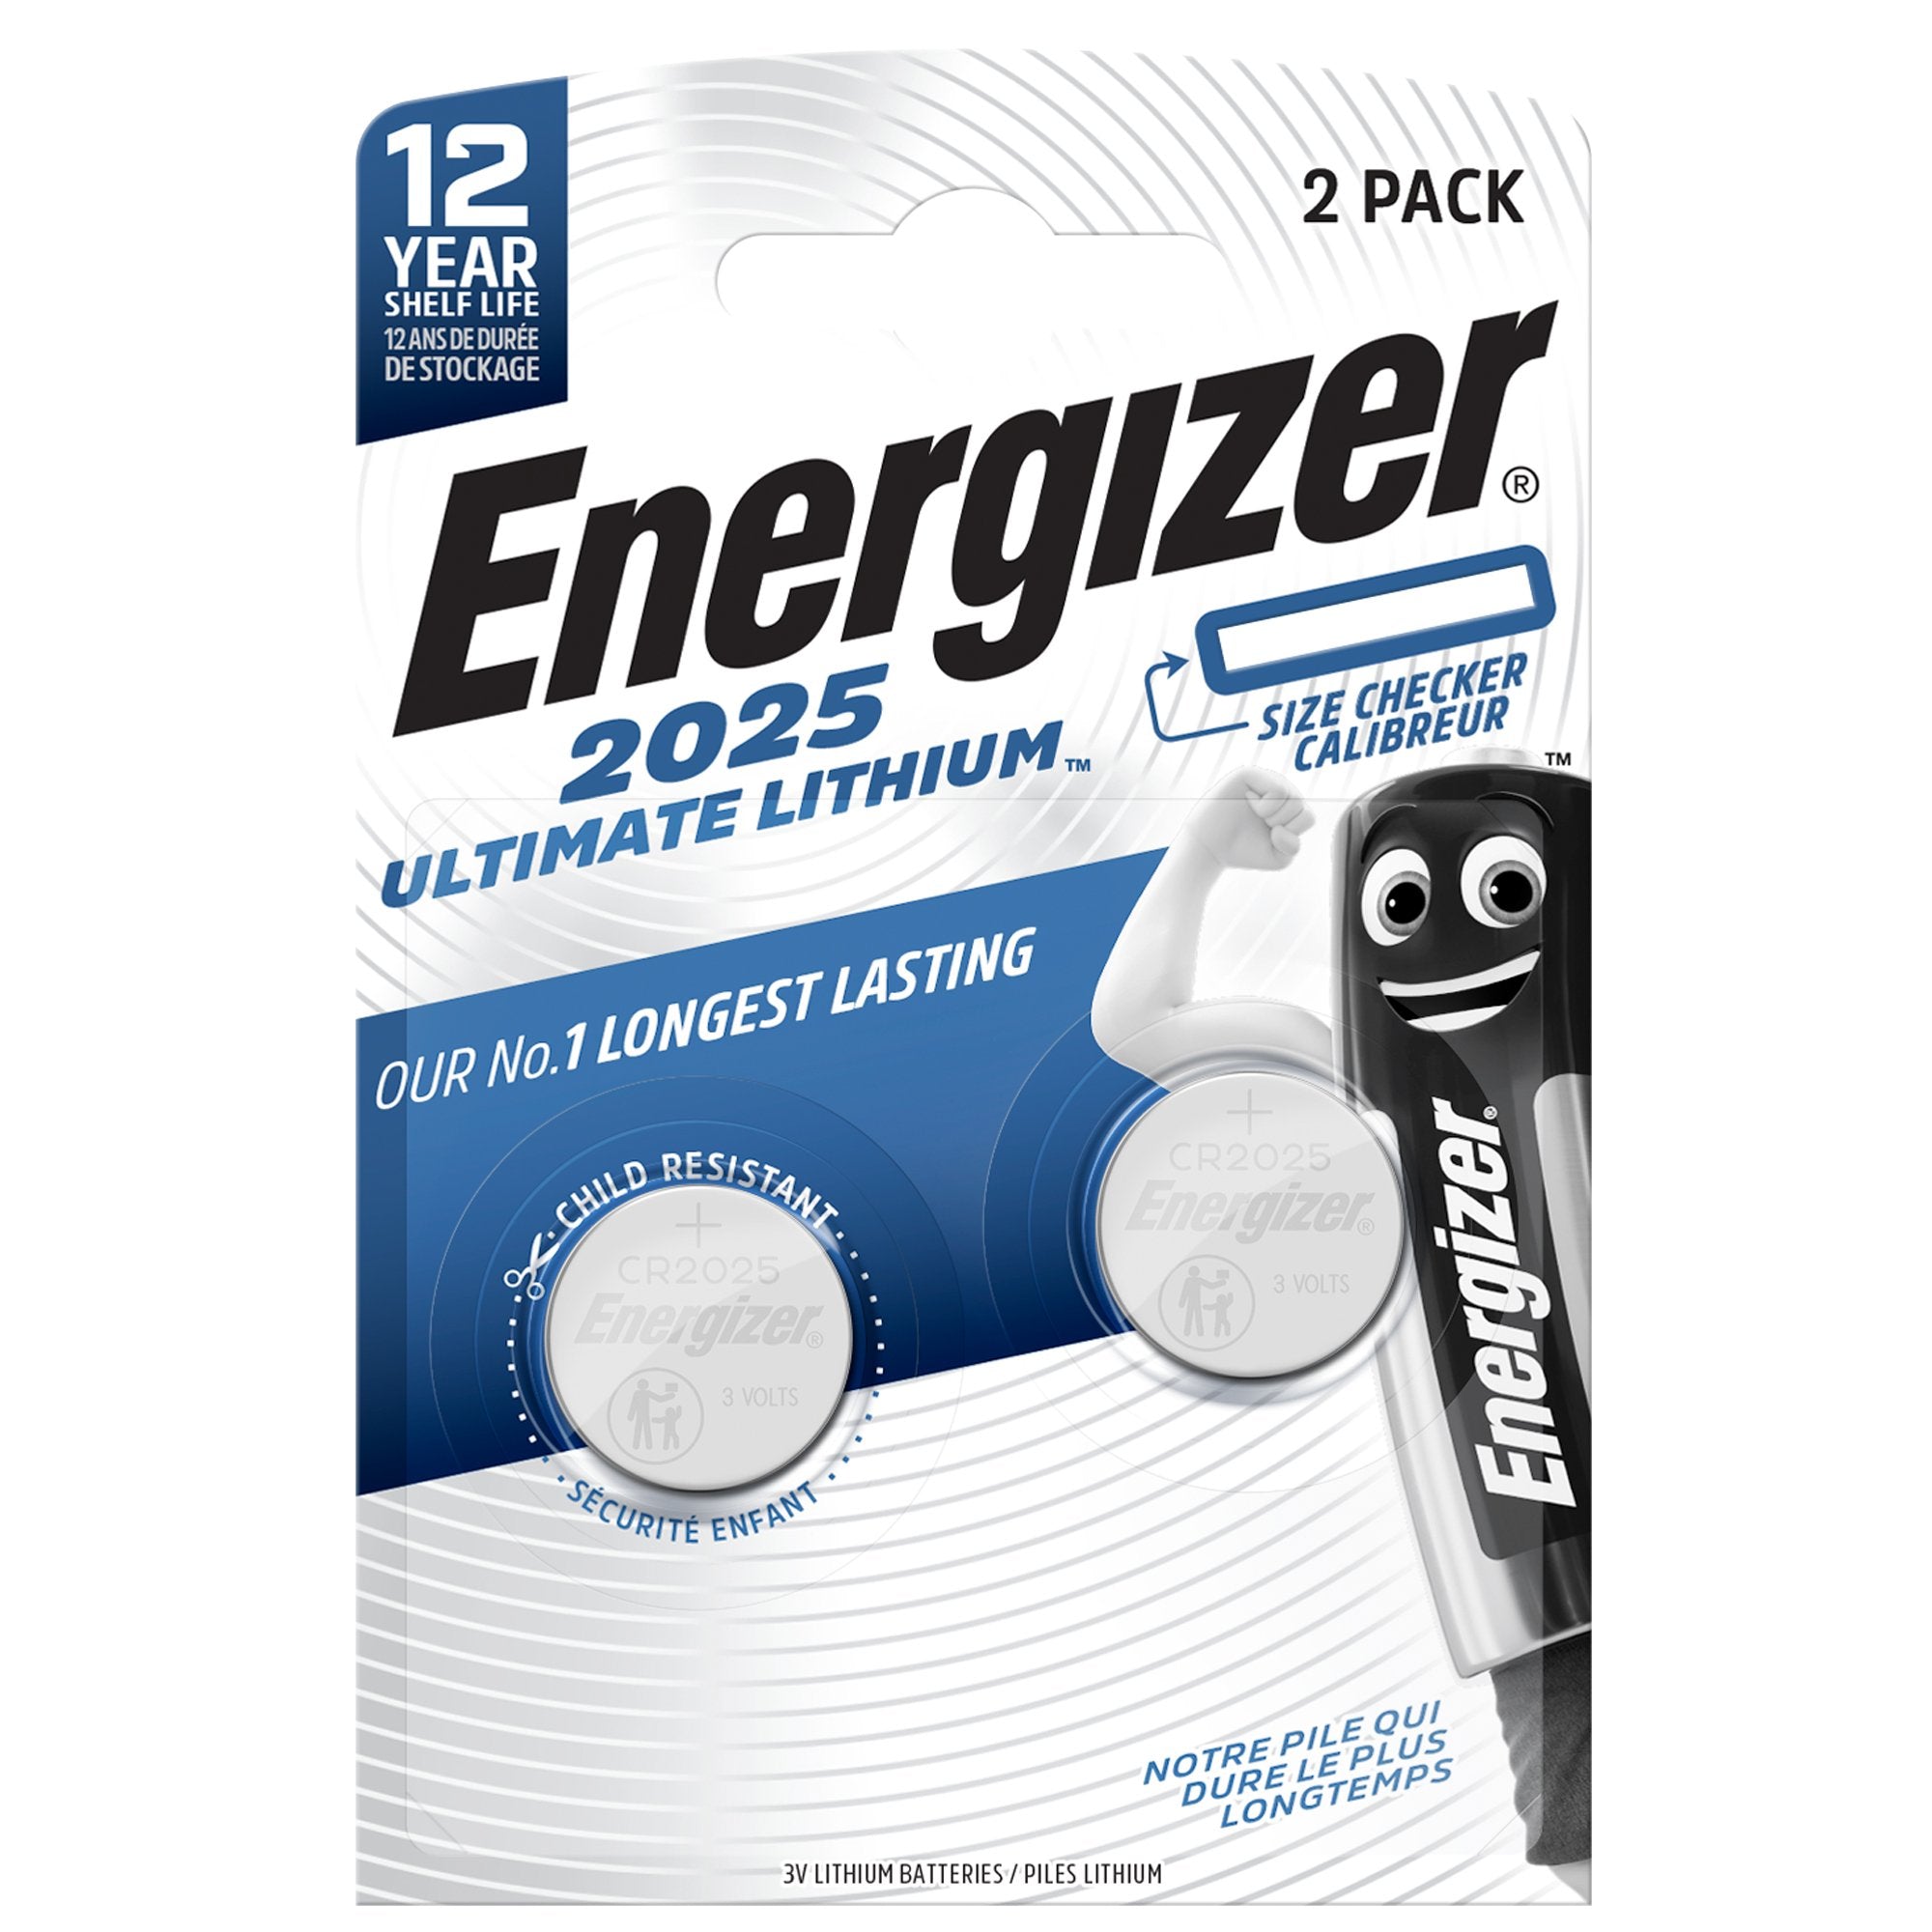 energizer-blister-2-pile-cr2025-ultimate-lithium-specialistiche